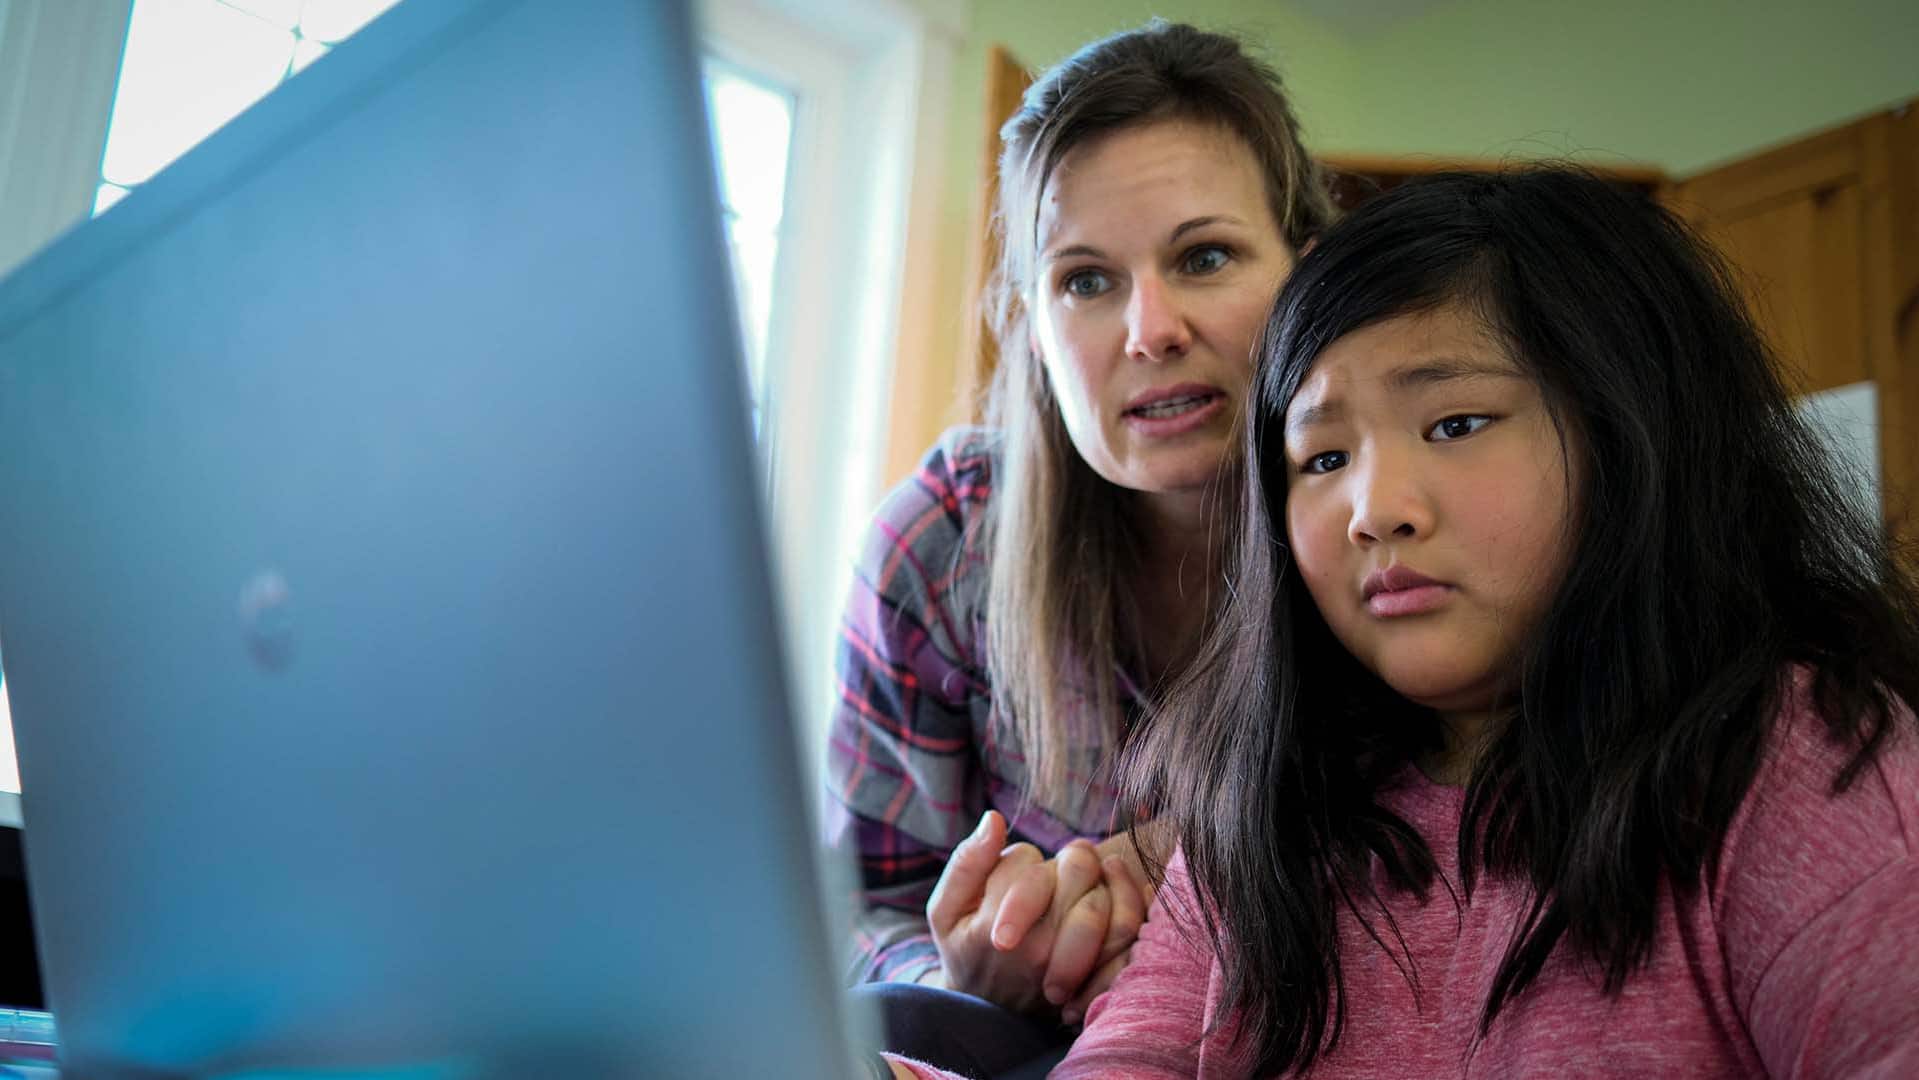 Parents frustrated as some schools shift online, others plow ahead amid rising COVID-19 cases